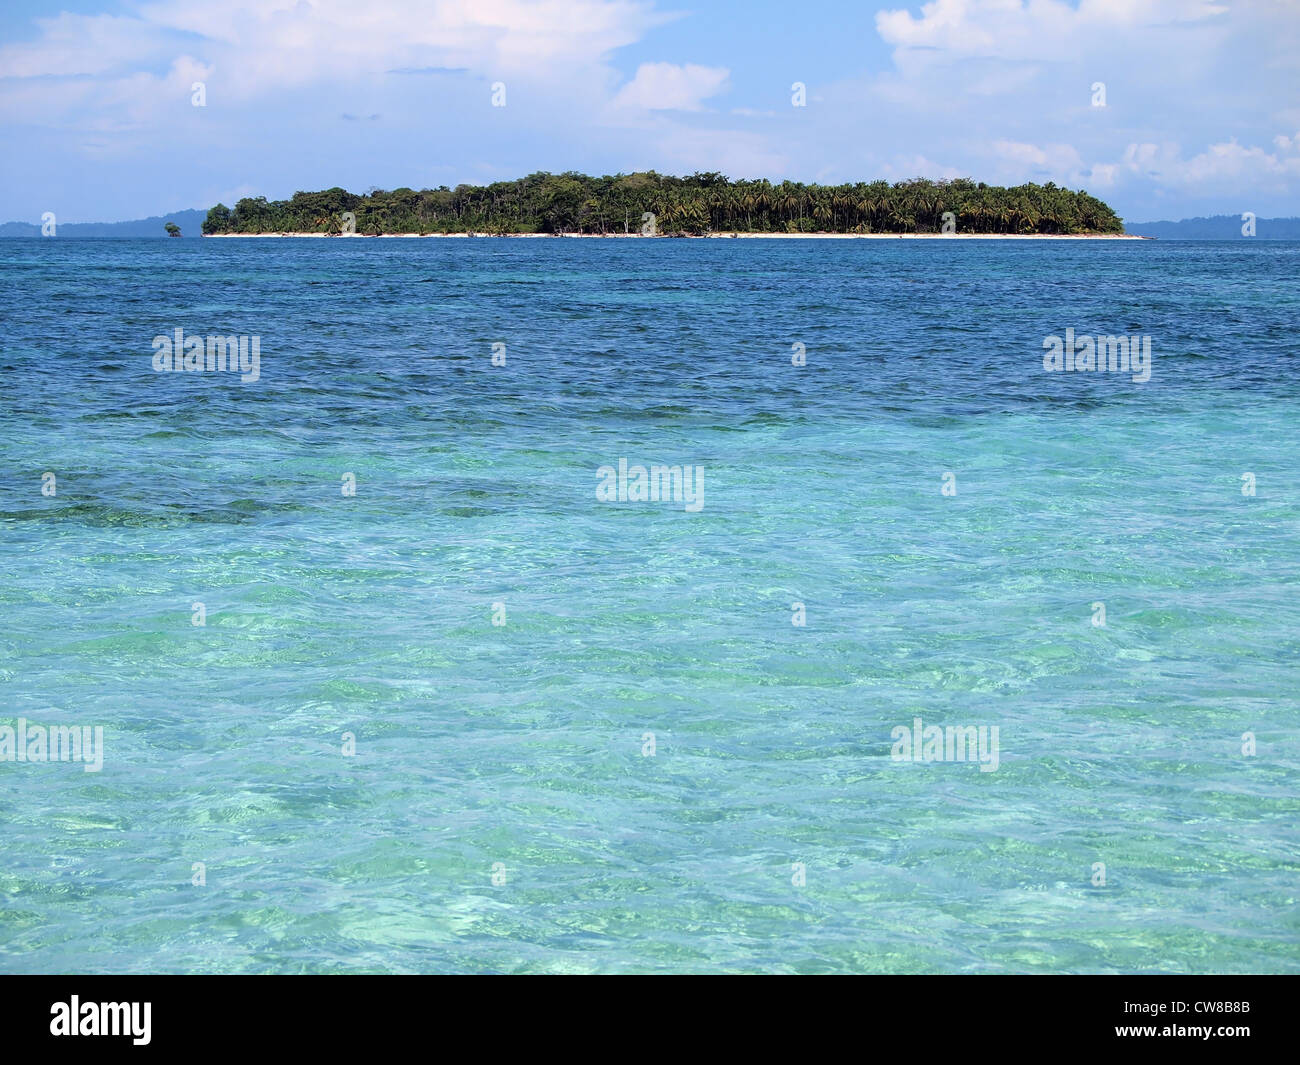 Unspoiled Caribbean island with turquoise waters Stock Photo